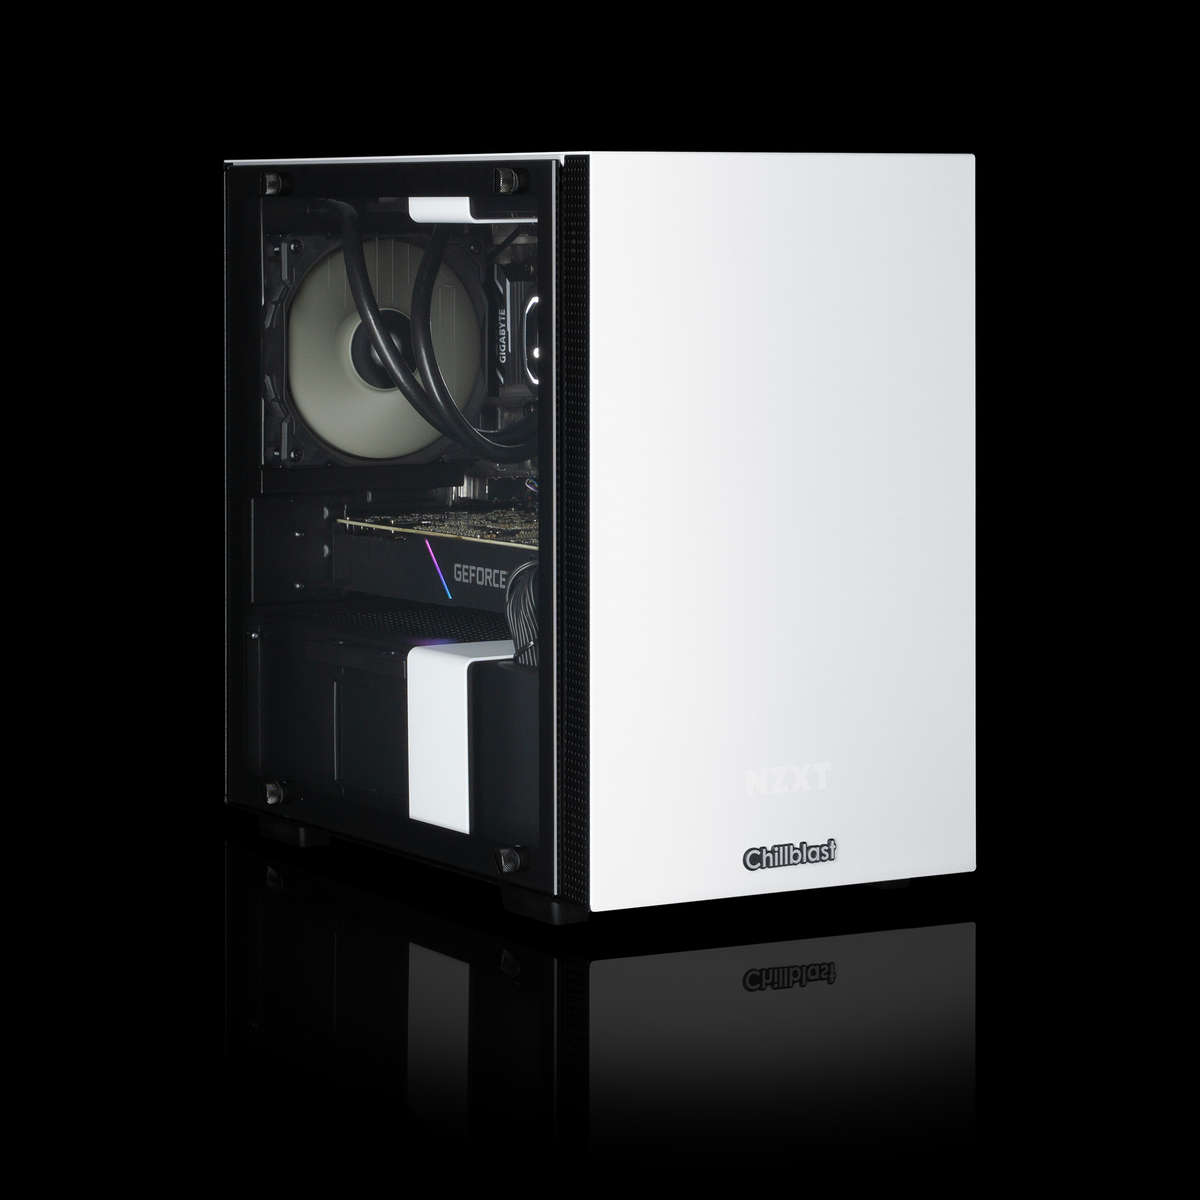 Image of the pre-built Chillblast Ion Advanced Gaming PC against a dark background. 